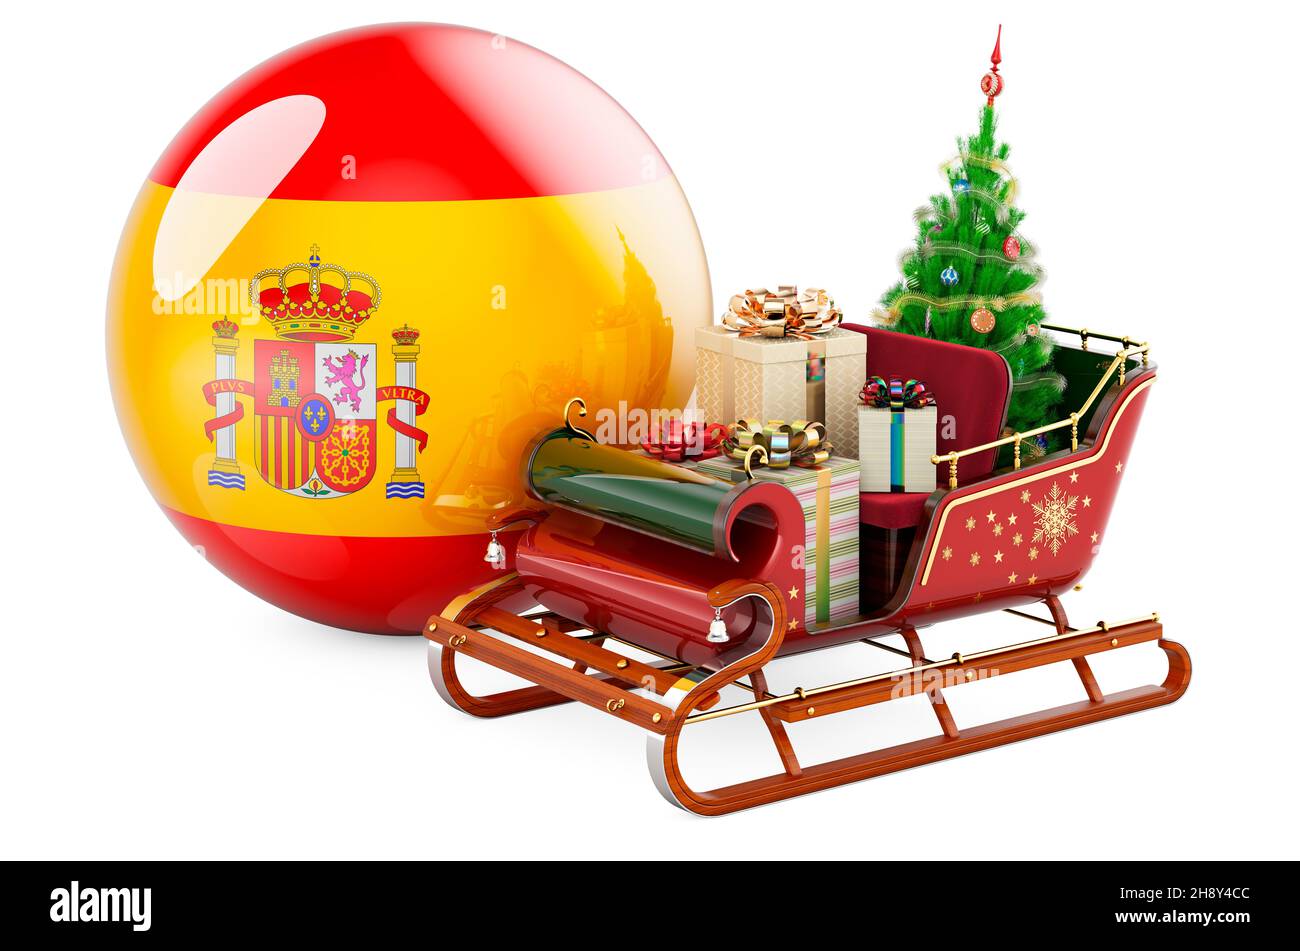 Christmas in Spain, concept. Christmas Santa sleigh full of gifts with Spanish flag. 3D rendering isolated on white background Stock Photo